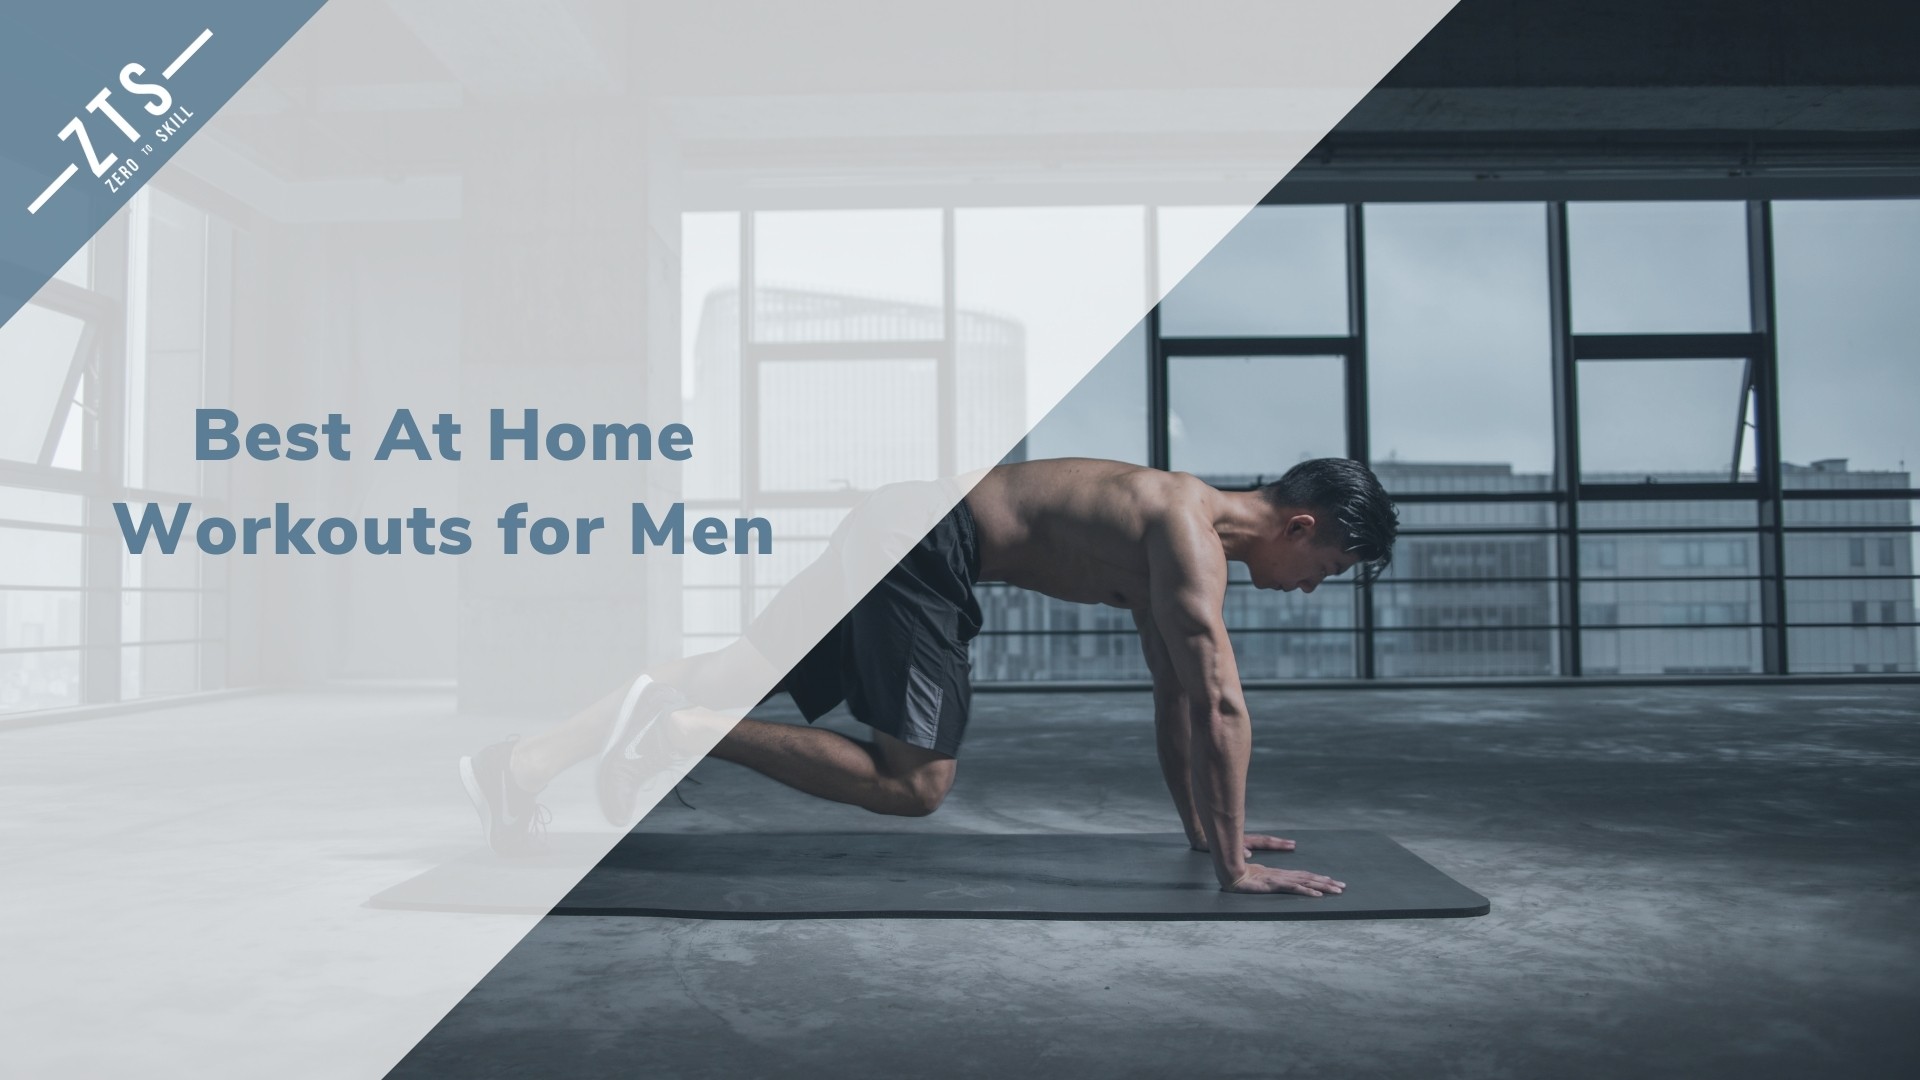 Best At Home Workouts for Men